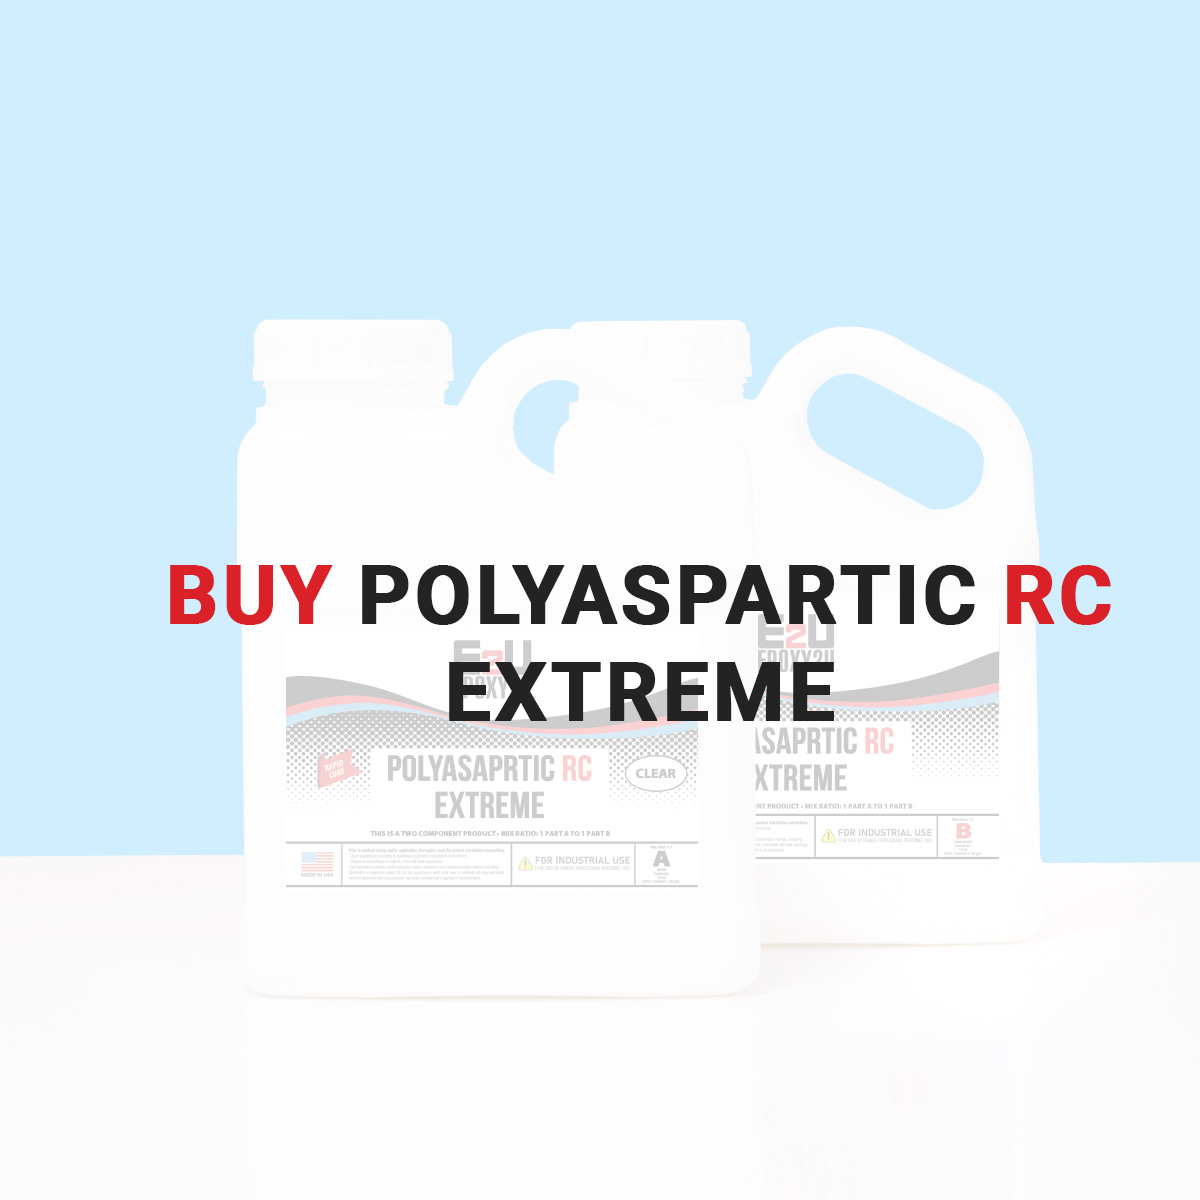 Buy Polyasaprtic RC EXTREME Hover